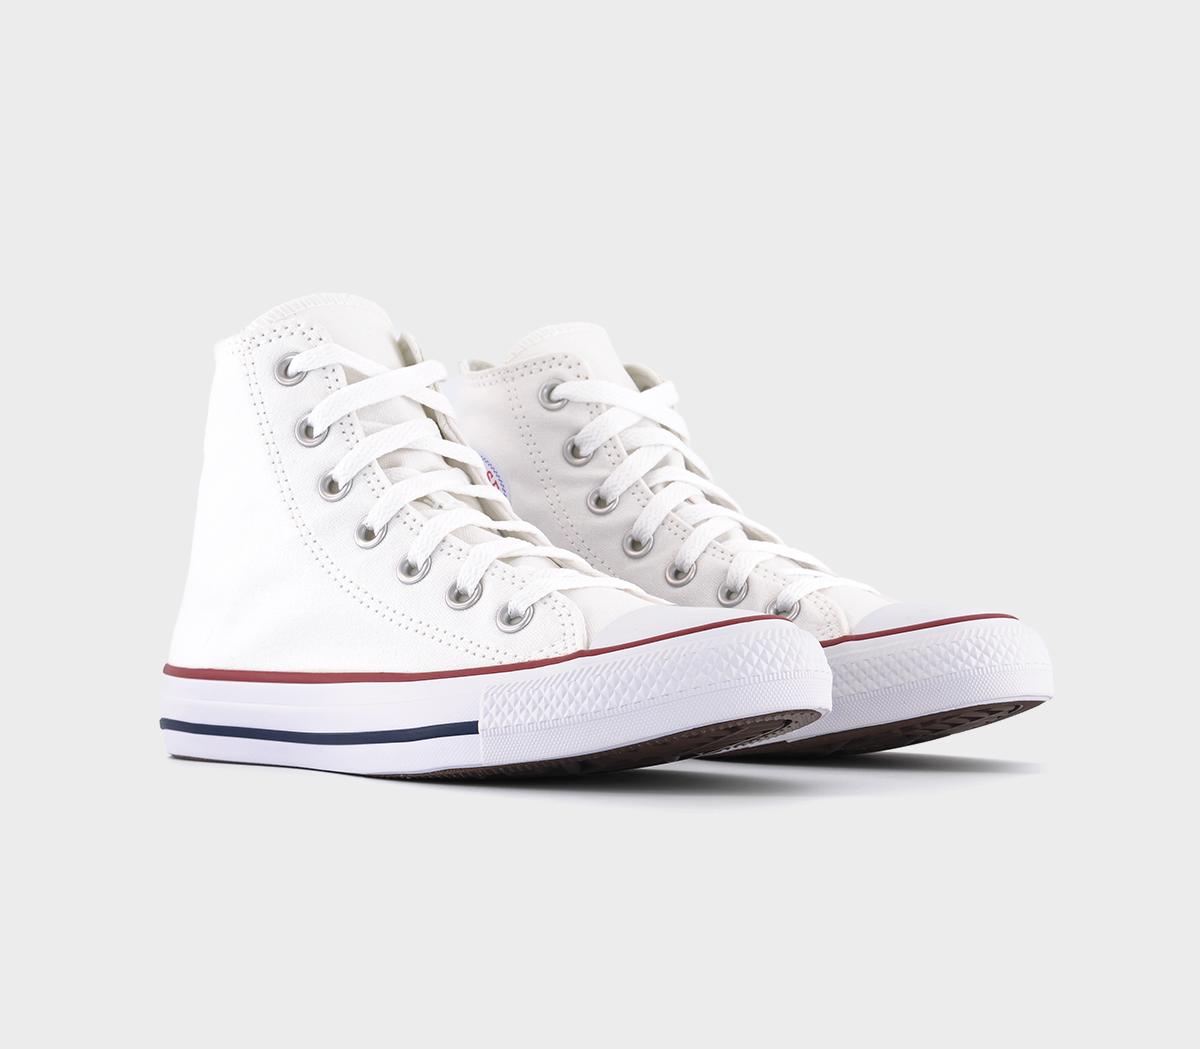 Converse White All Star High Optical Trainers, 9